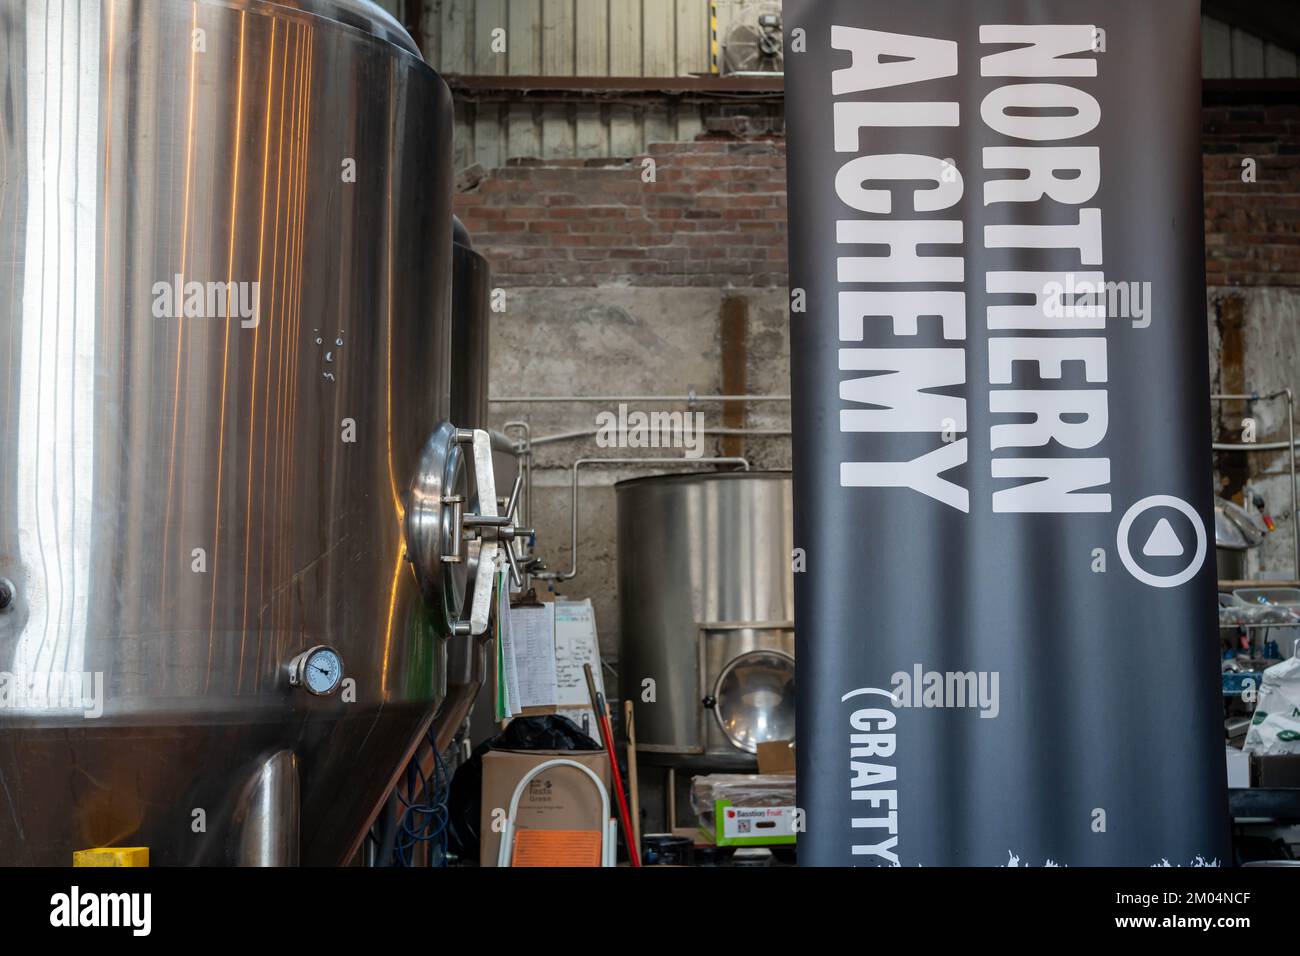 Northern Alchemy's brewing equipment inside the Old Coal Yard bar and venue in Newcastle upon Tyne, UK. Stock Photo